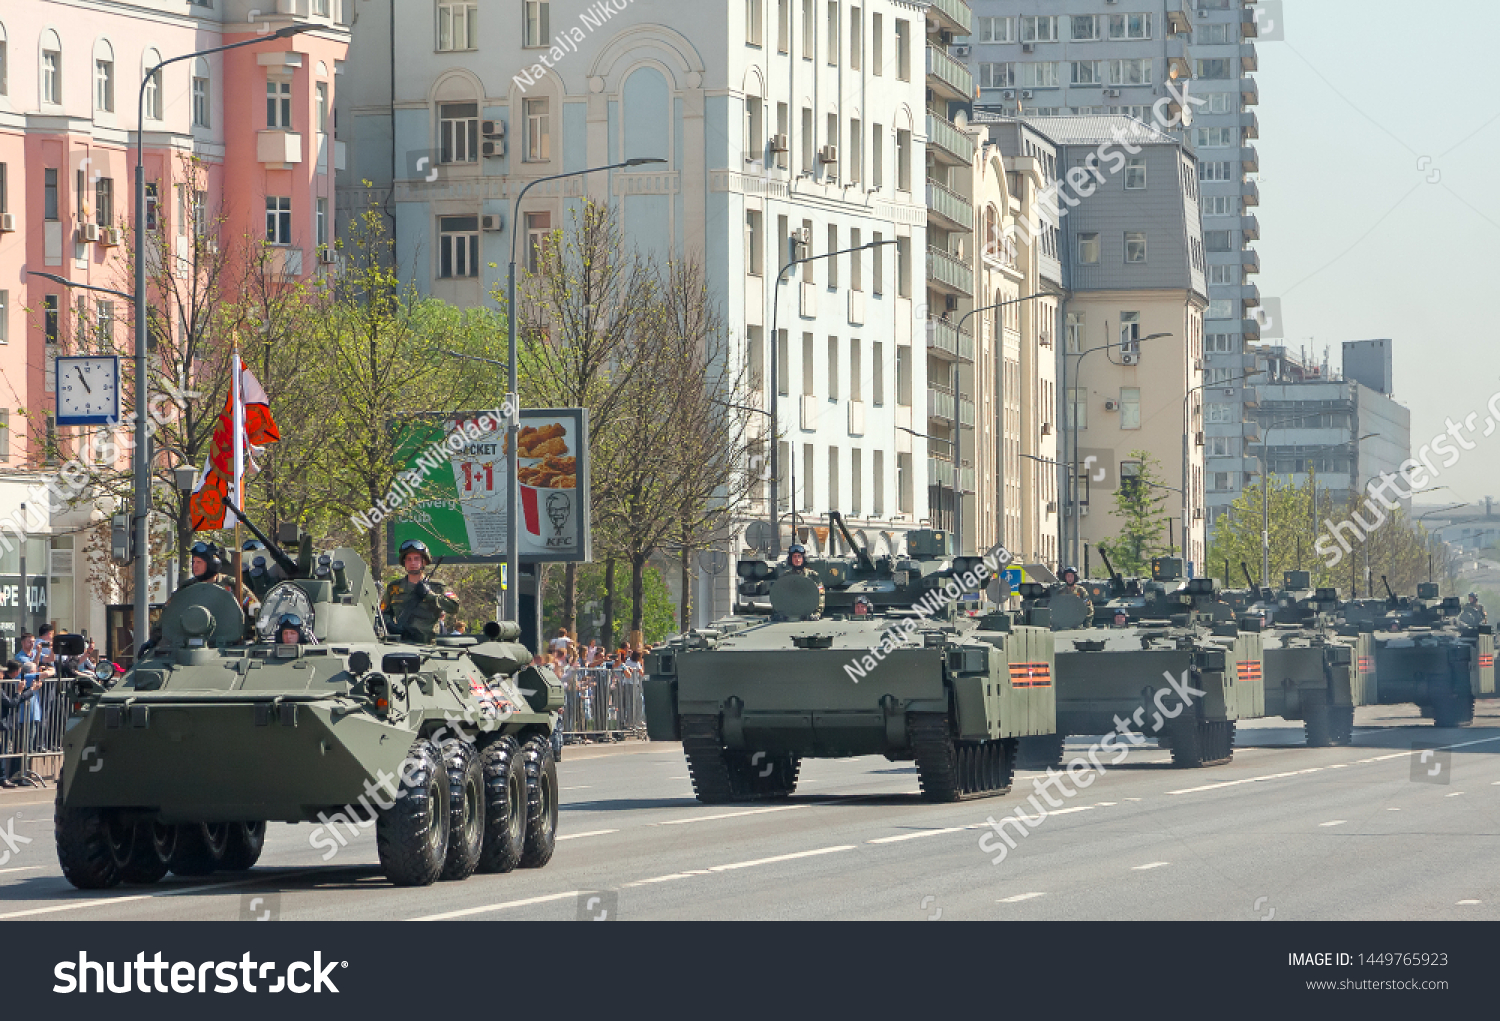 stock-photo-moscow-russia-may-new-arbat-column-of-infantry-fighting-vehicles-kurganets-on-armata-1449765923.jpg